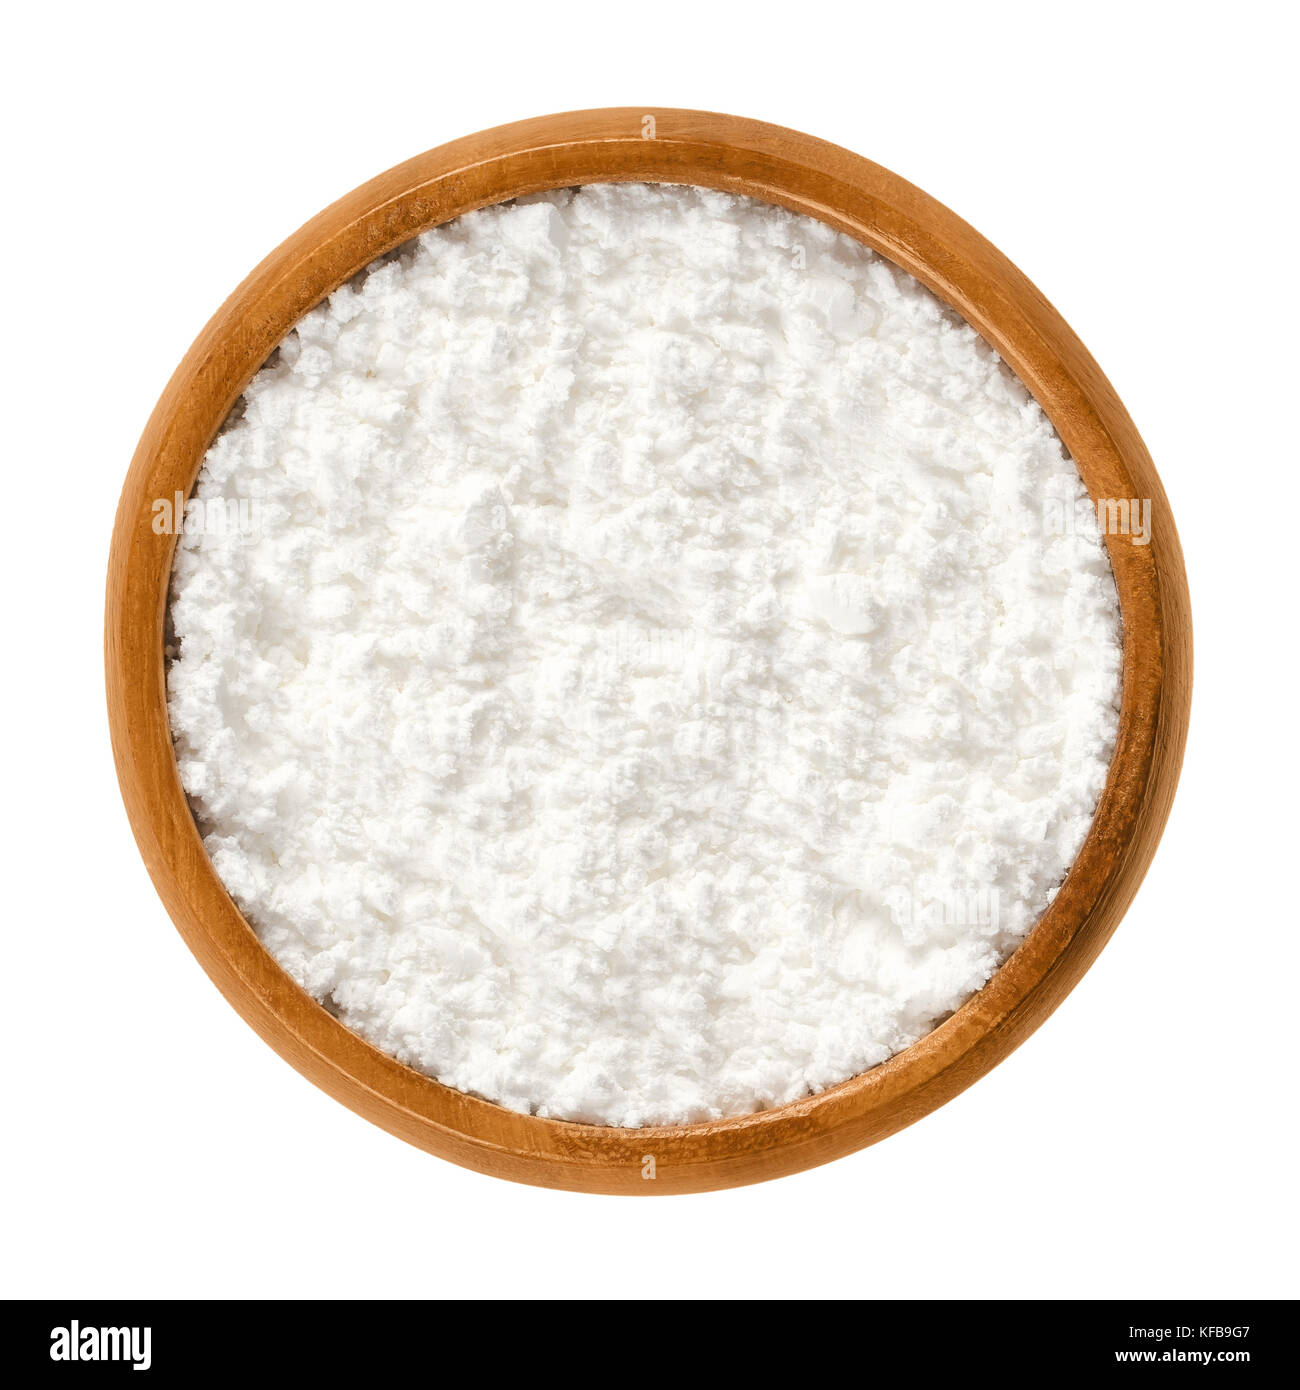 Powdered sugar in wooden bowl. Unsifted finely ground white refined sugar. Also called confectioners or icing sugar and icing cake. Photo. Stock Photo